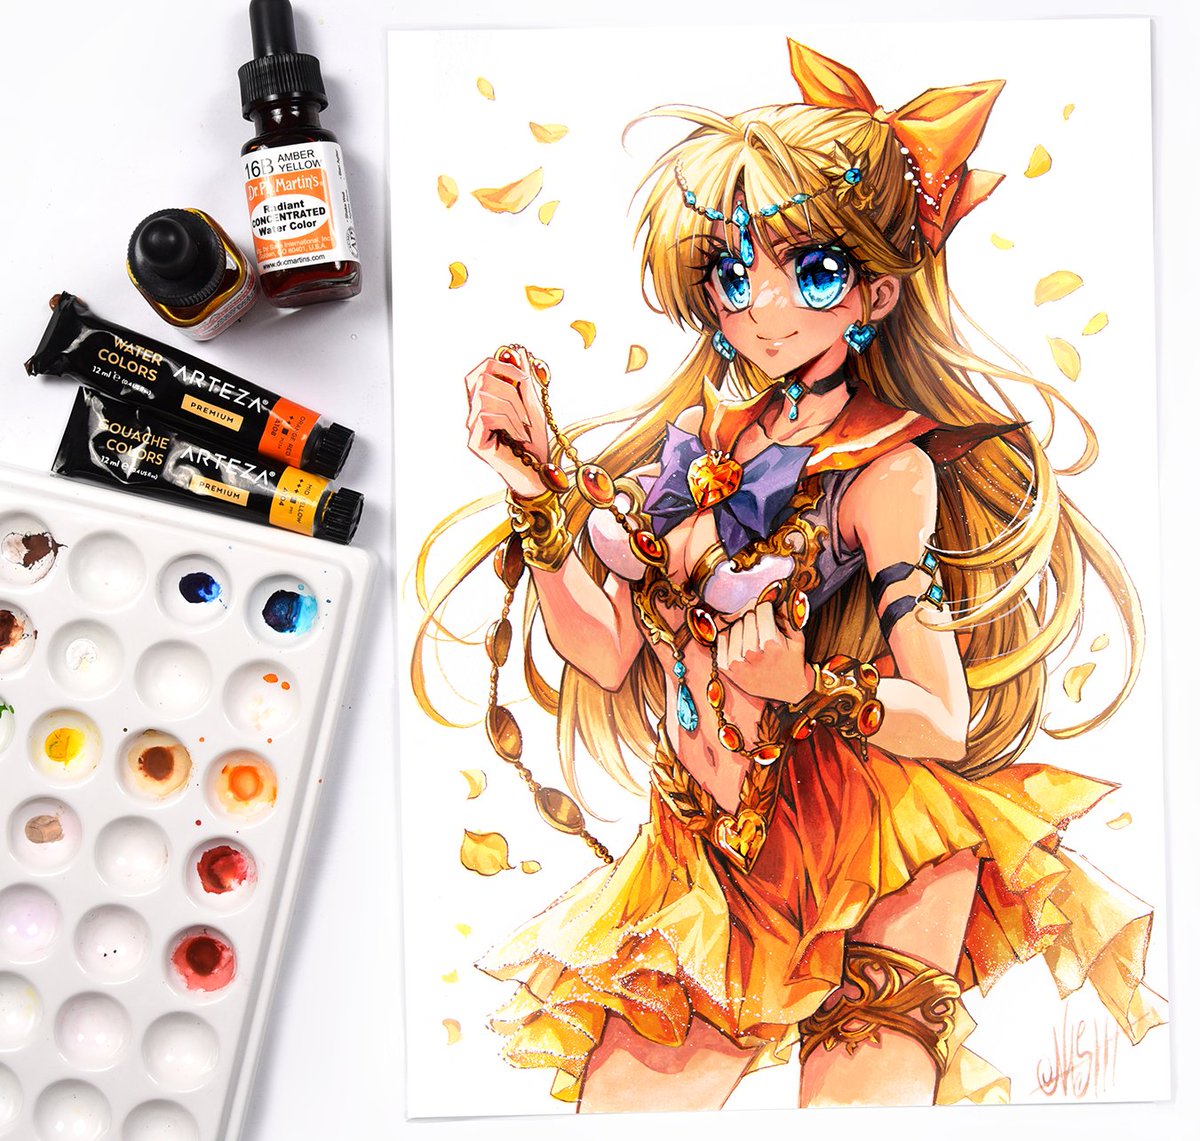 Thank you to all who has visited us at the Gamescom. It was an unforgetable and wonderful Event with all of you 🩵🩵
#美少女戦士セーラームーン
#セーラームーン
#sailorvenus #sailormoon #art  #sailormooncrystal #manga #painting #sailormoon90s #minakoaino #sailormooneternal #anime